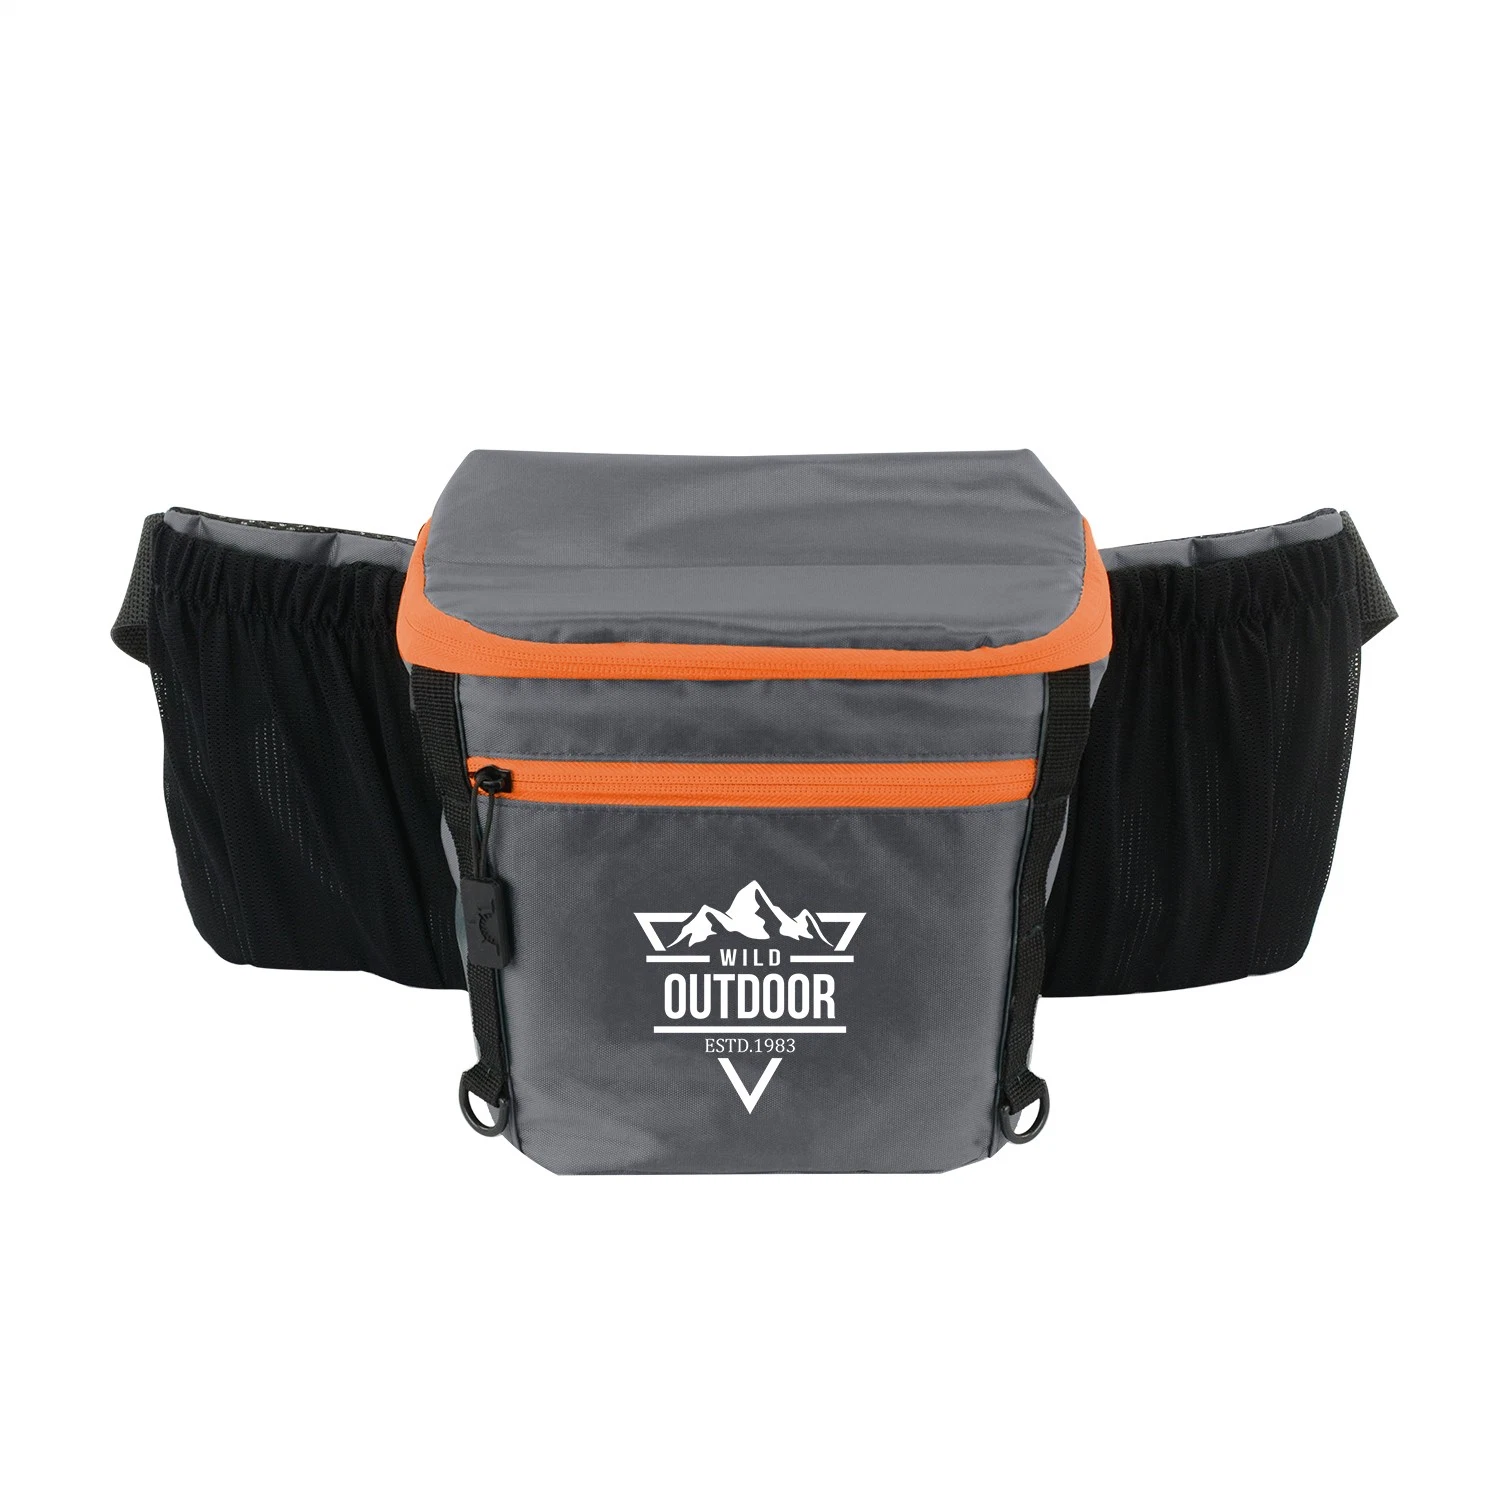 New Arrival Small Insulated Fanny Pack Cooler for Outdoors Travel Camping Waist Pack Cooler Bag